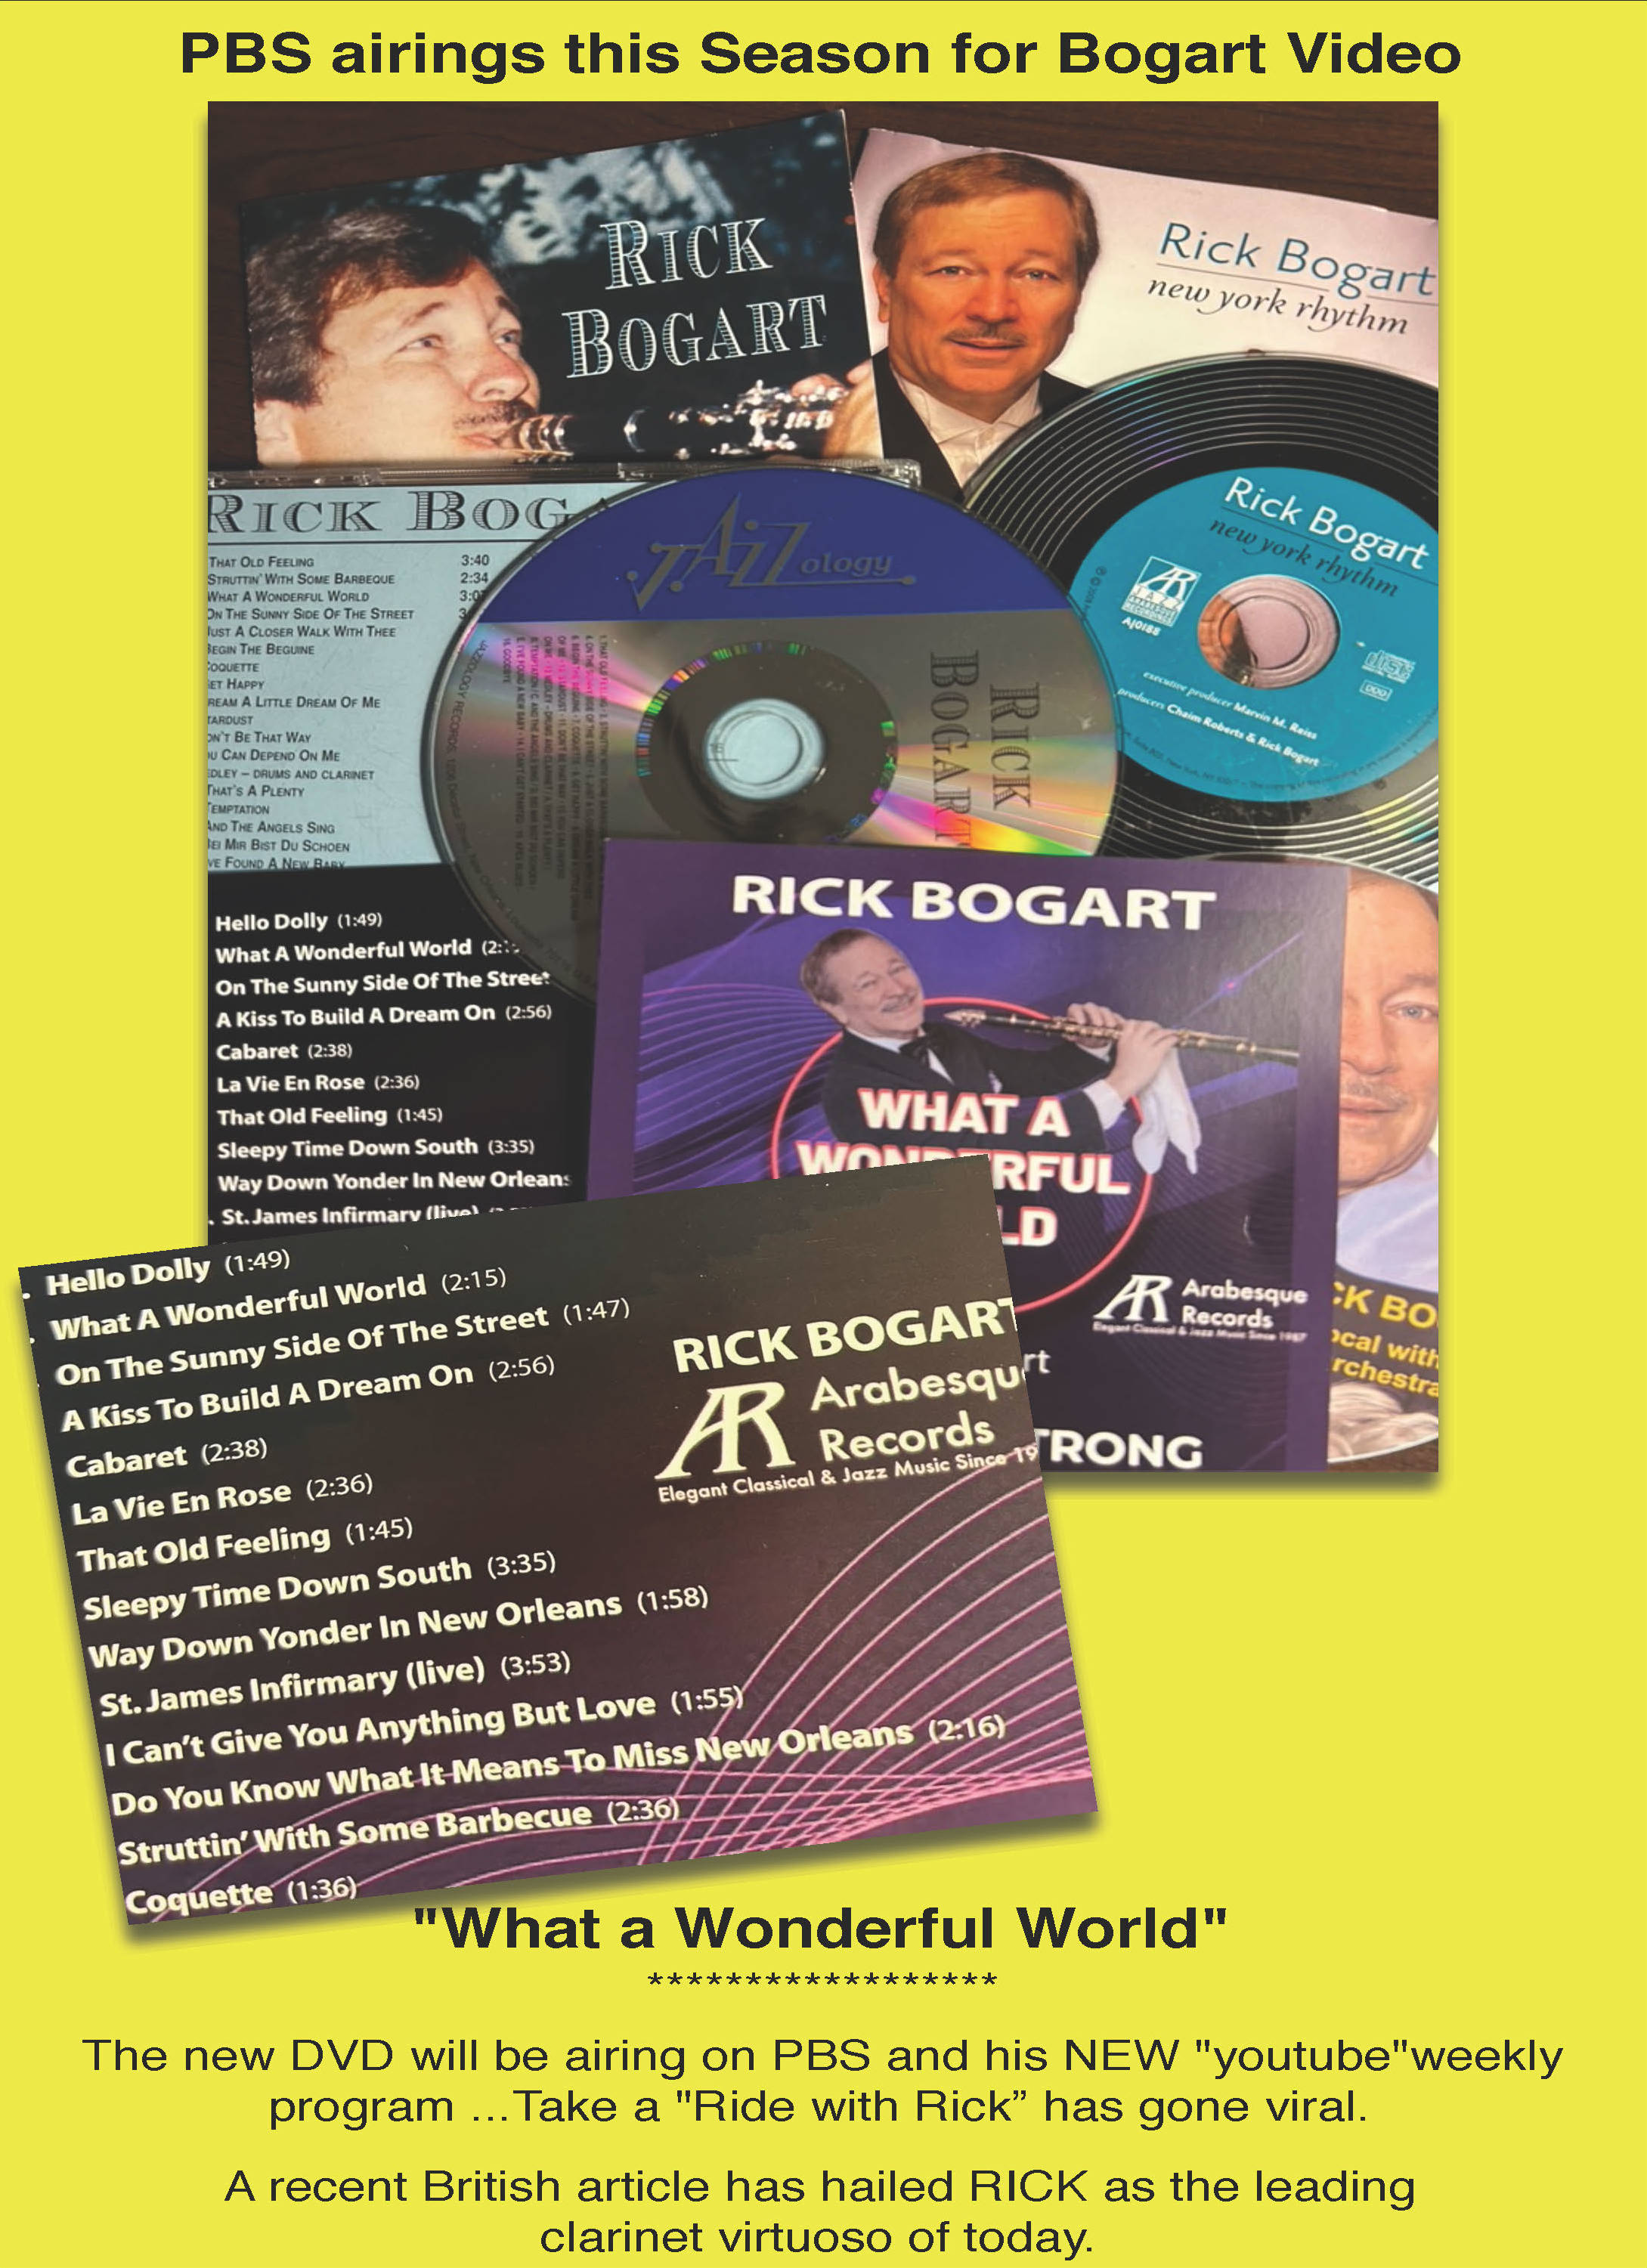 PBS airings this season for Bogart Video;  What a Wonderful World; The new DVD will be airing on PBS and his NEW youtube weekly program ... Take a Ride with Rick has gone viral.; A recent British article has hailed Rick as the leading clarinet virtuoso of today.